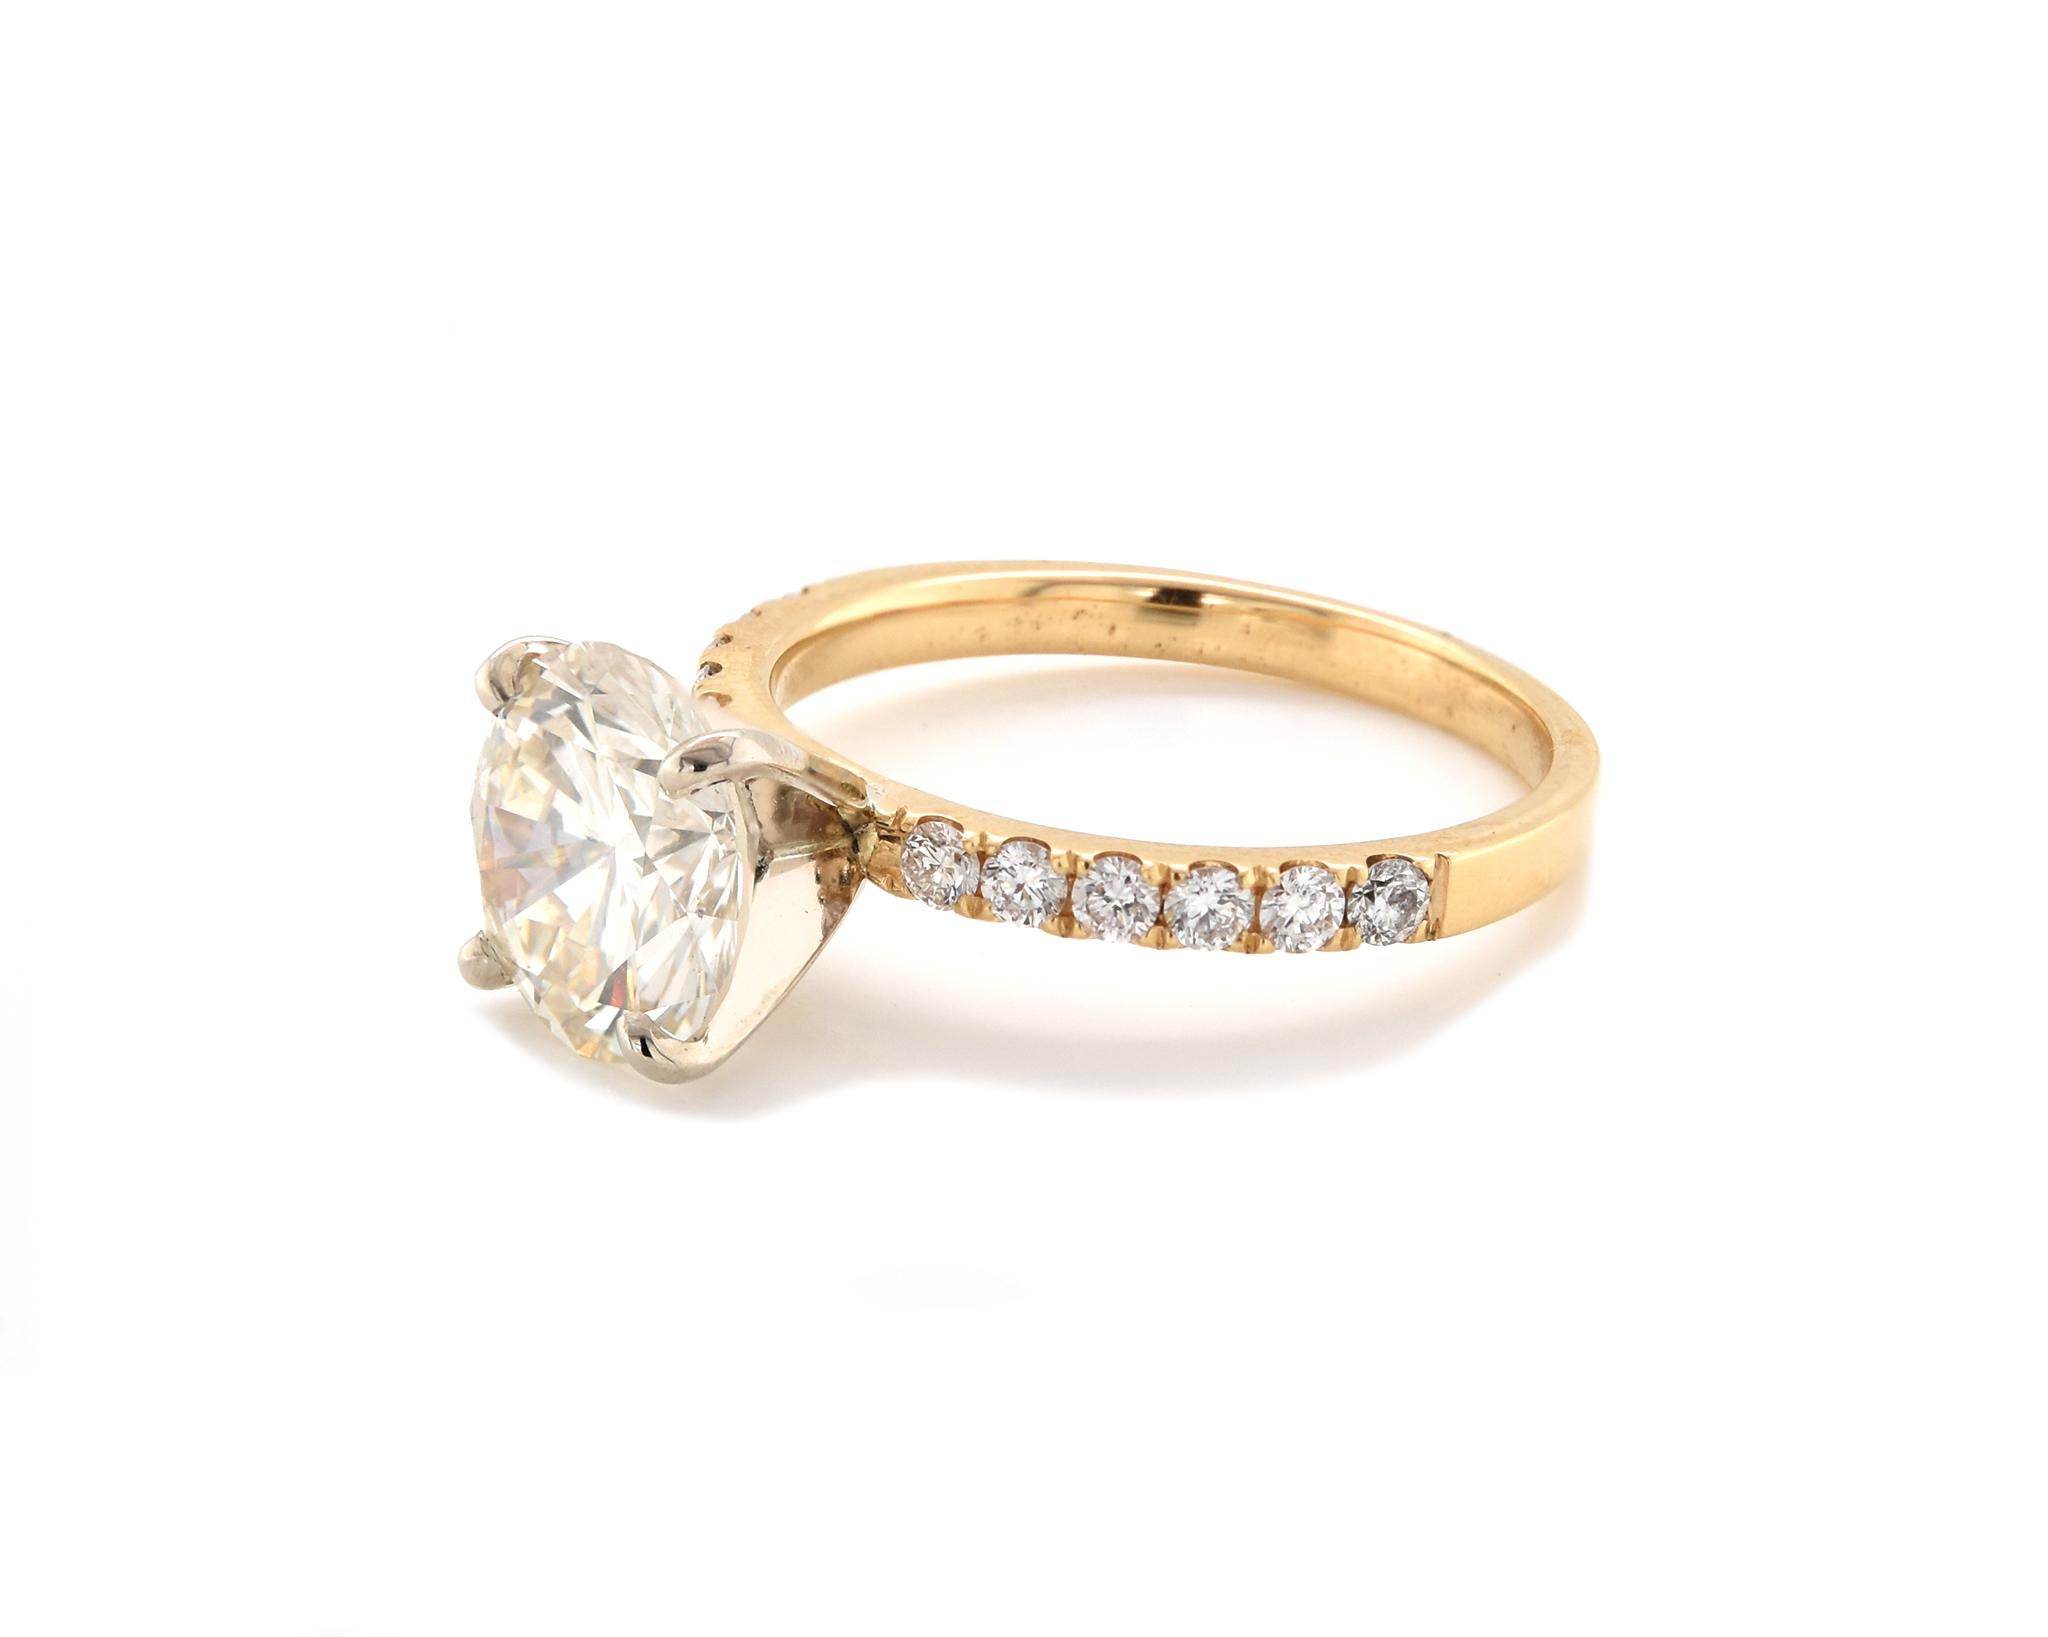 Designer: custom
Material: 18K yellow gold
Diamond: 1 round brilliant cut = 2.83ct
Color: L
Clarity: SI1
Diamonds: 12 round cut = .36cttw
Color: G
Clarity: VS2
Ring Size: 7 (please allow up to 2 additional business days for sizing